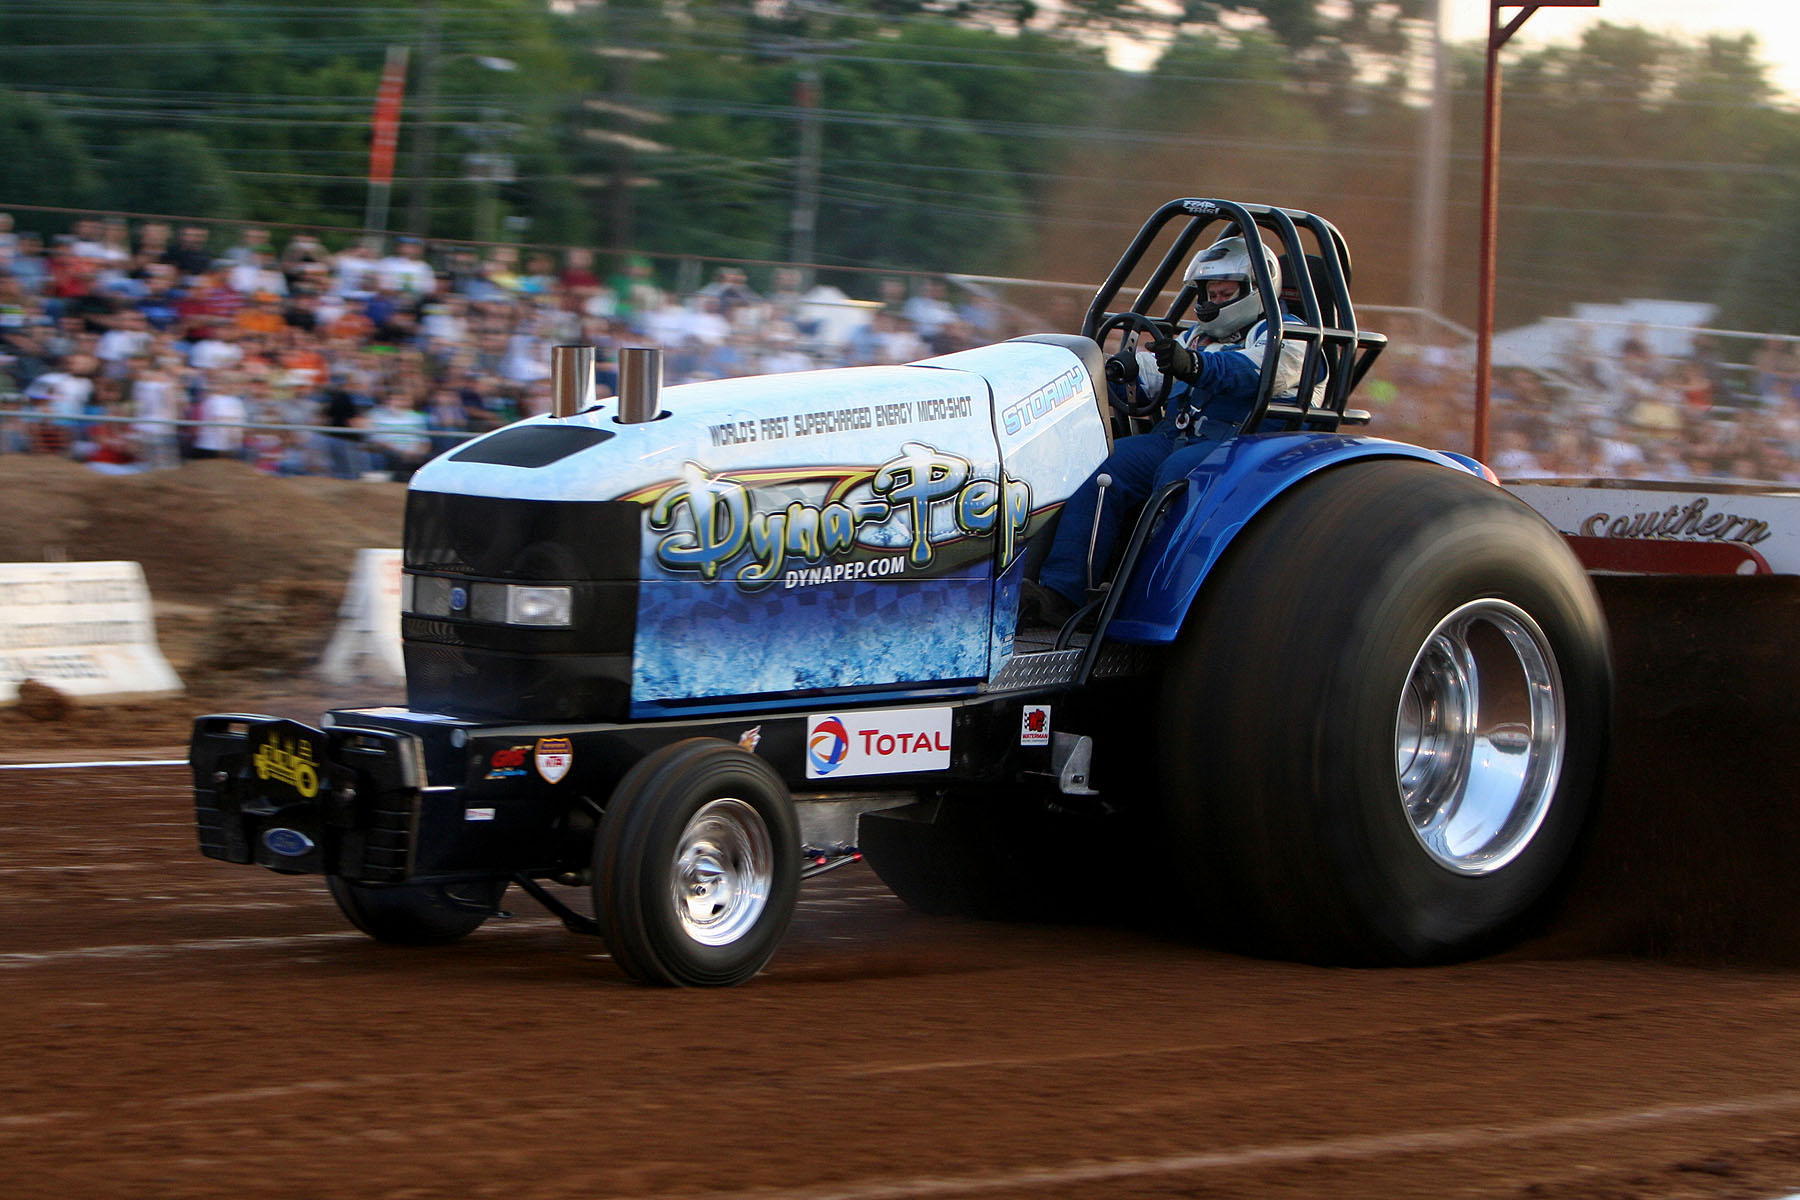 tractor pulling, Race, Racing, Hot, Rod, Rods, Tractor, Gr Wallpaper